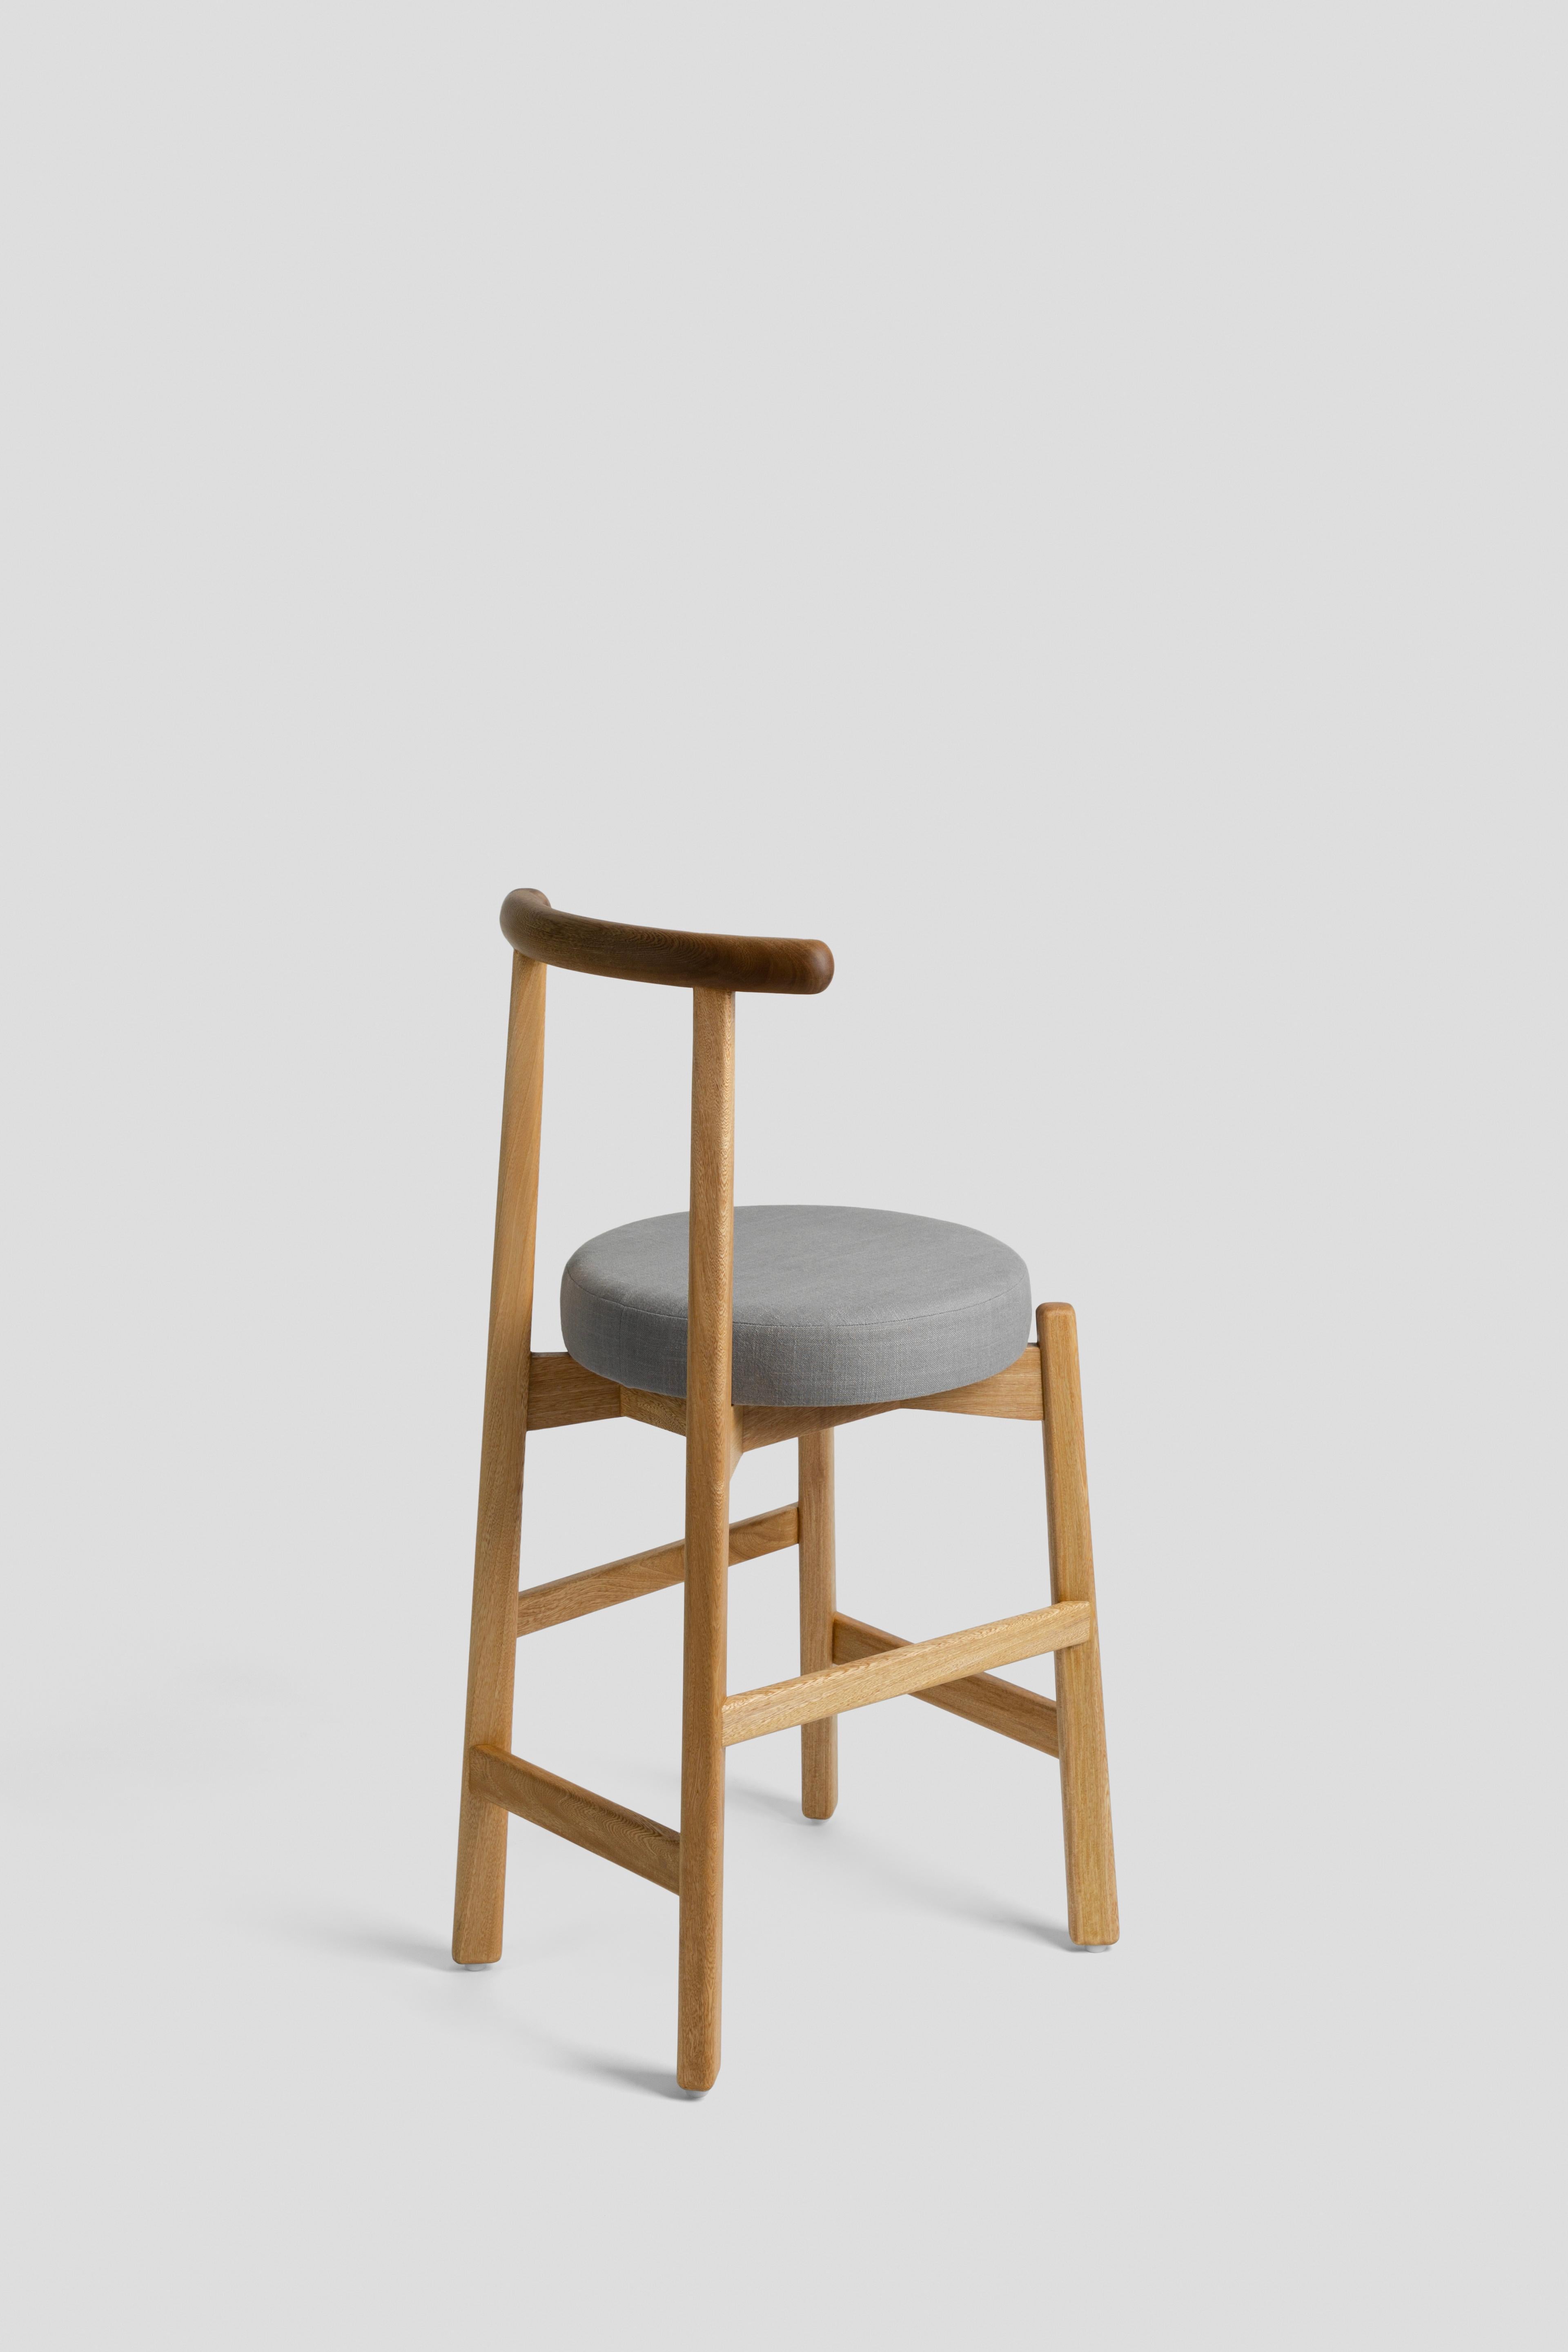 Colima Bar Stool, Modern Contemporary Mexican Design For Sale 1